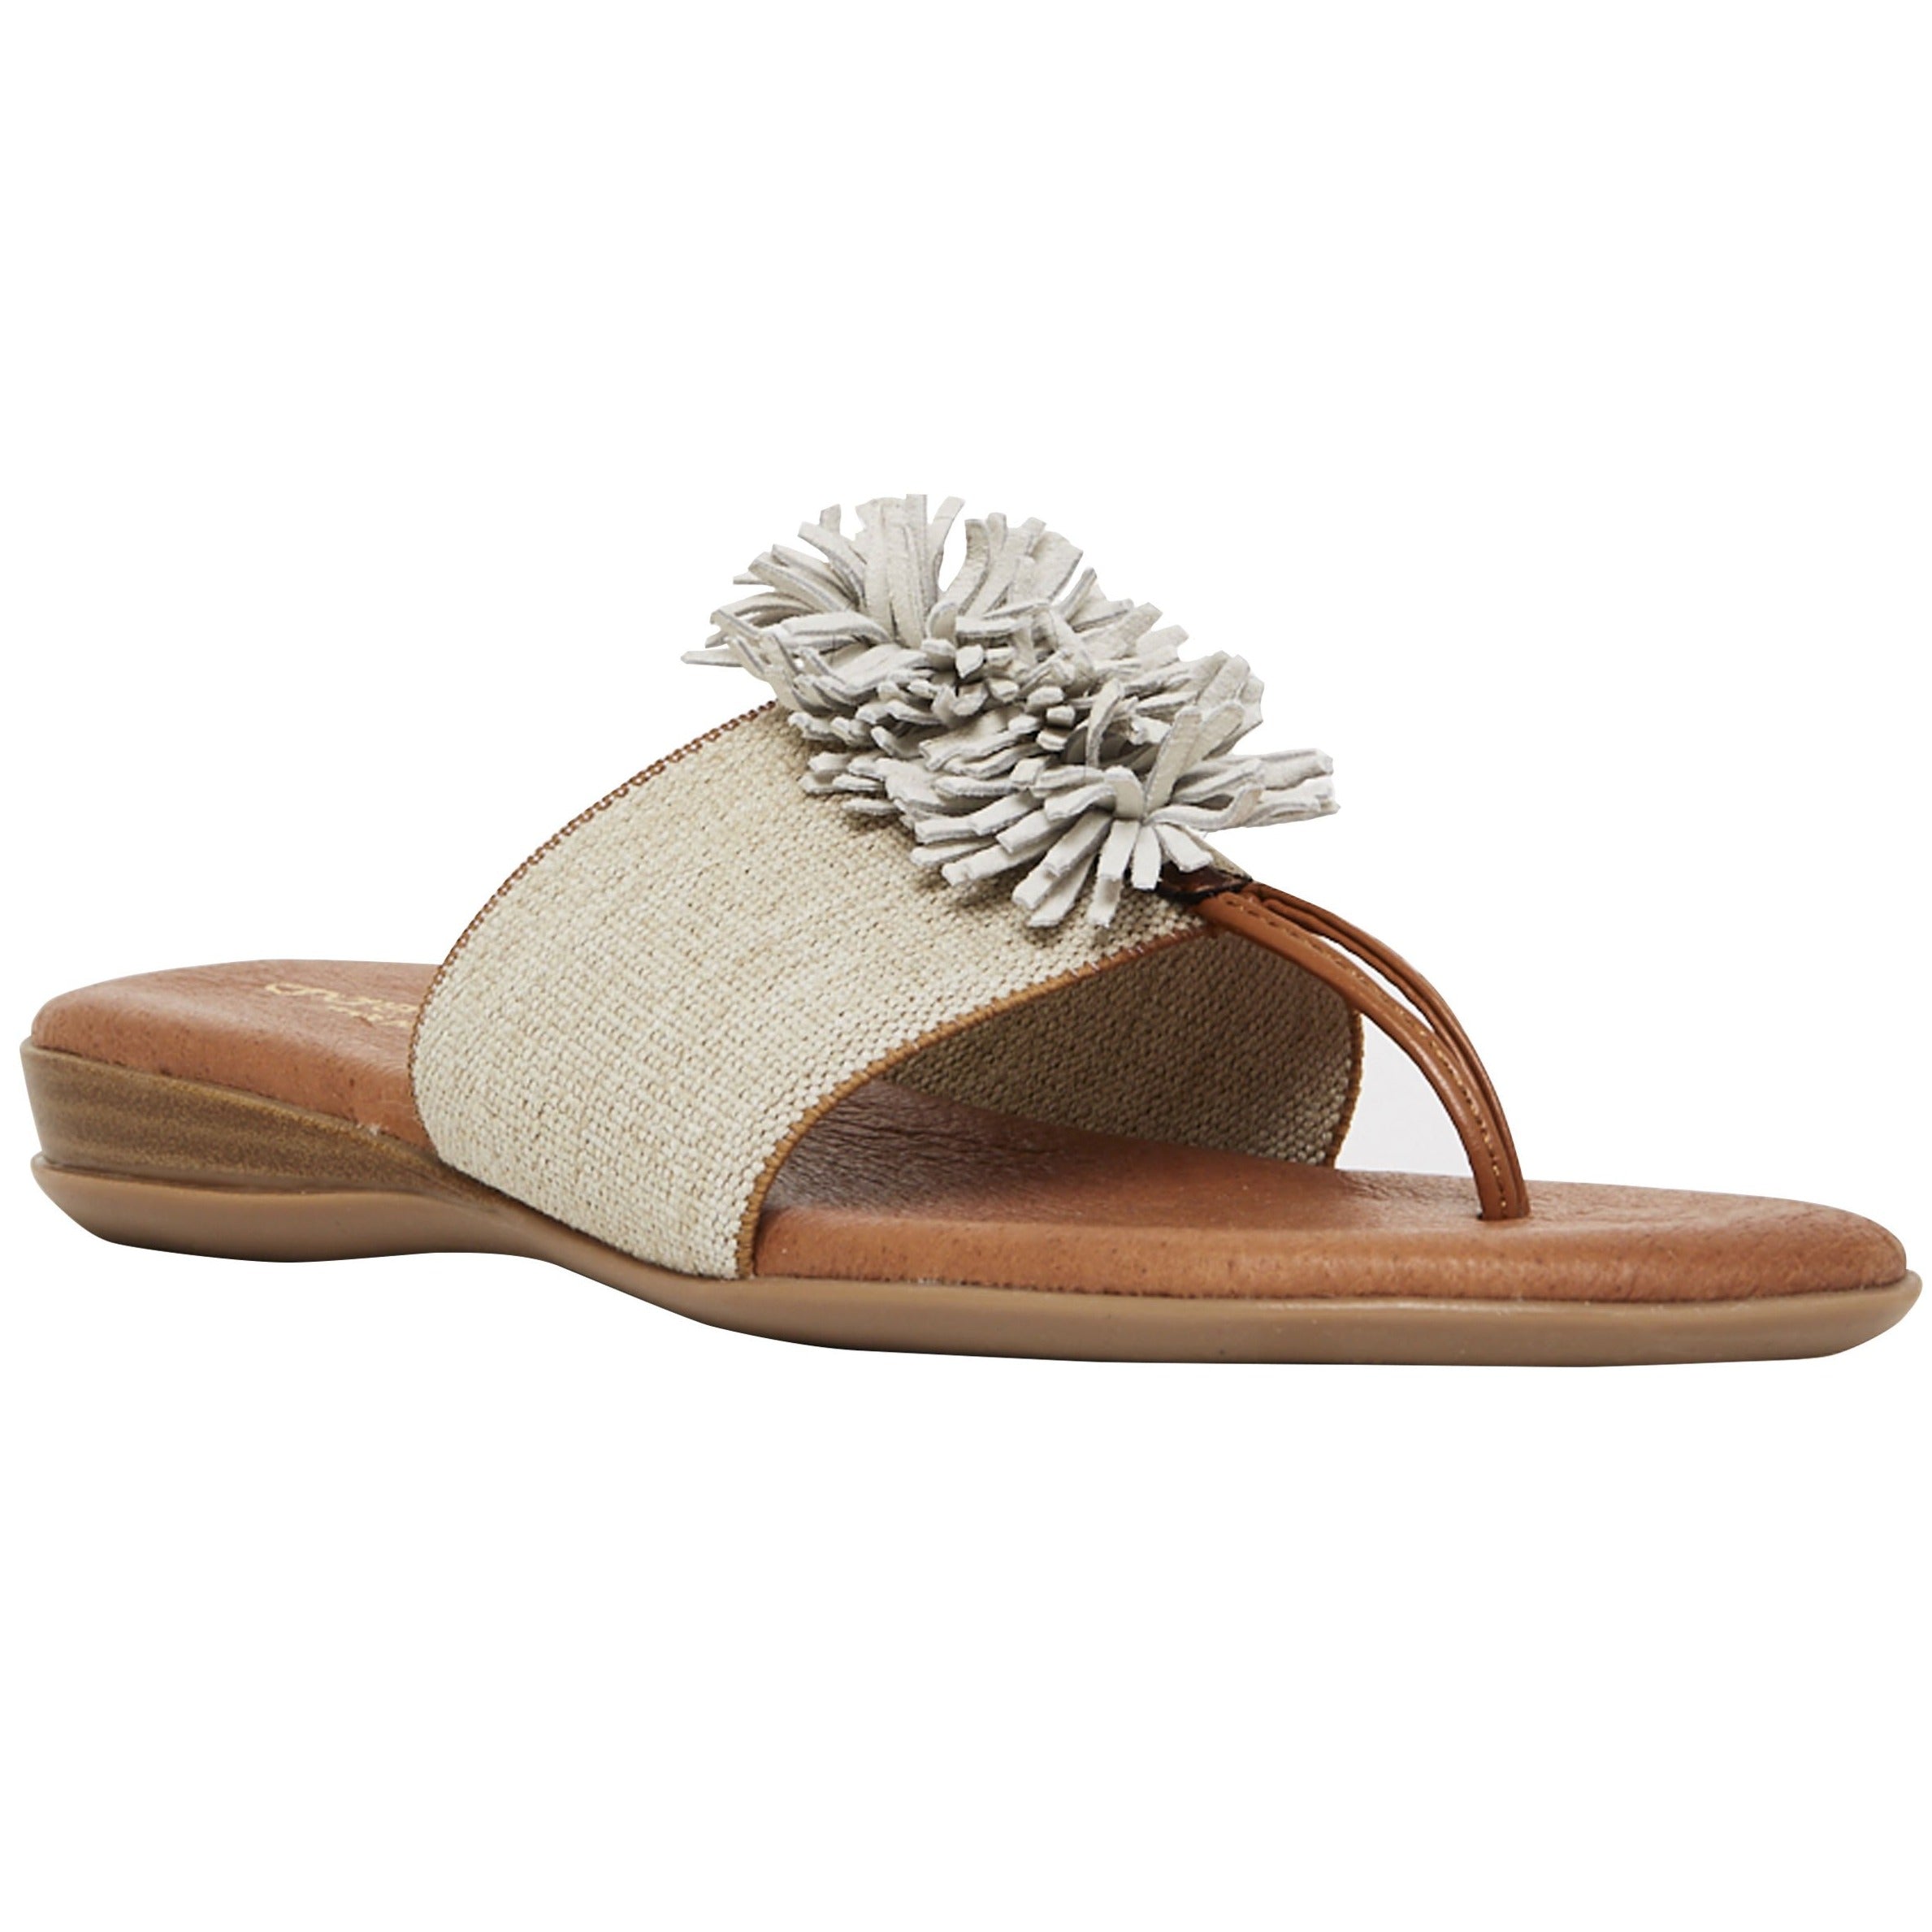 Slide on and go. The single band with festive puff decor adds a pop of fun to any ensemble. Feel delicious all day in memory foam cushioned insoles. Walking. Lunching. Boardwalk, brunch, dinner. Easy Breezy and So Cute.802568908107 802568908114 802568908121 802568908138 802568908145 802568908152 802568908169 802568908169 andre assous Novalee - The Elastic Thong Sandal in Beige Linen